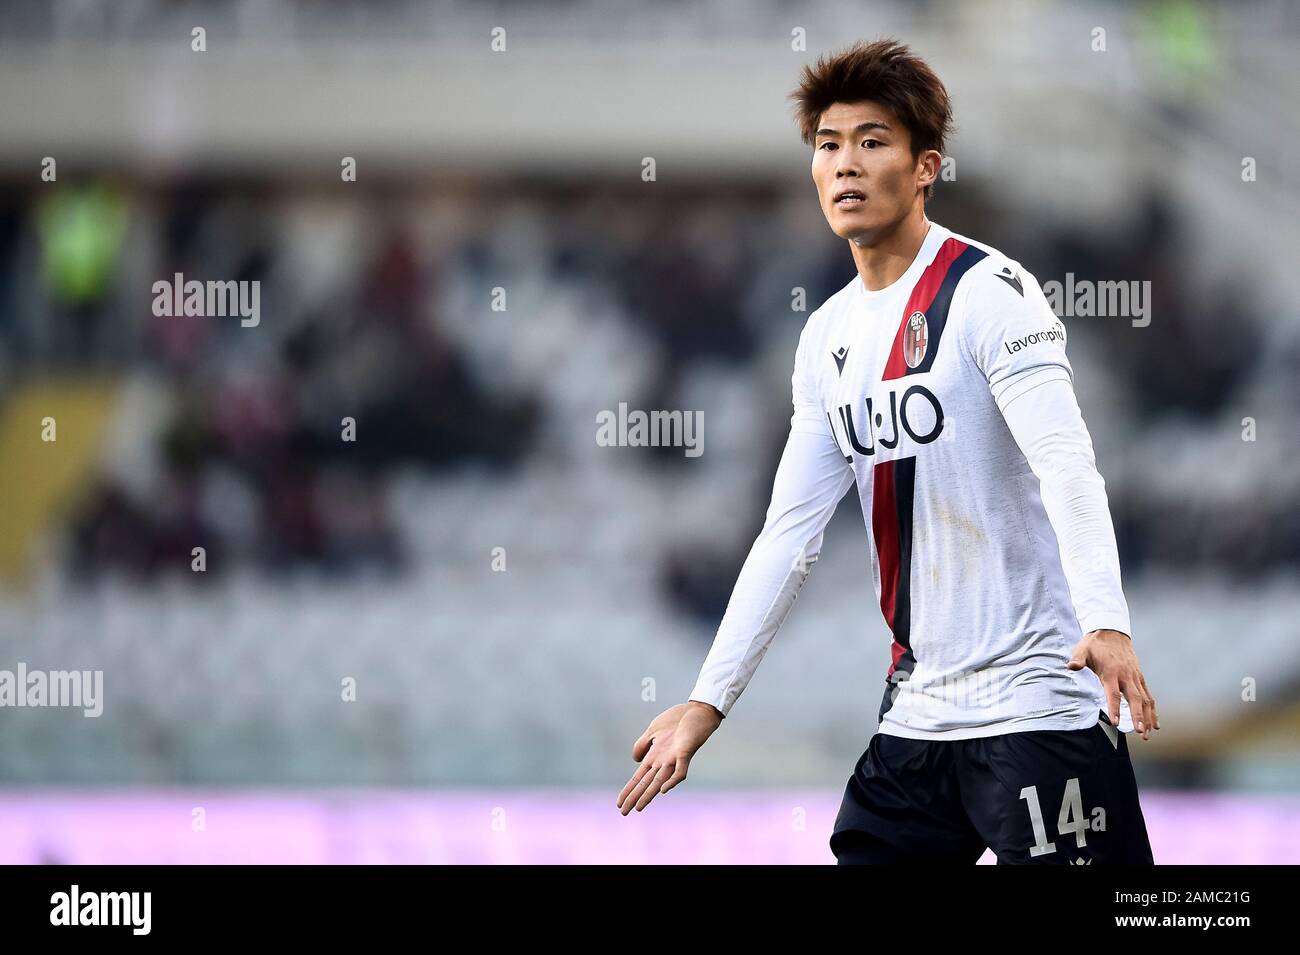 Turin, Italy - 12 January, 2020: Takehiro Tomiyasu of Bologna FC looks on during the Serie A football match between Torino FC and Bologna FC. Torino FC won 1-0 over Bologna FC. Credit: Nicolò Campo/Alamy Live News Stock Photo